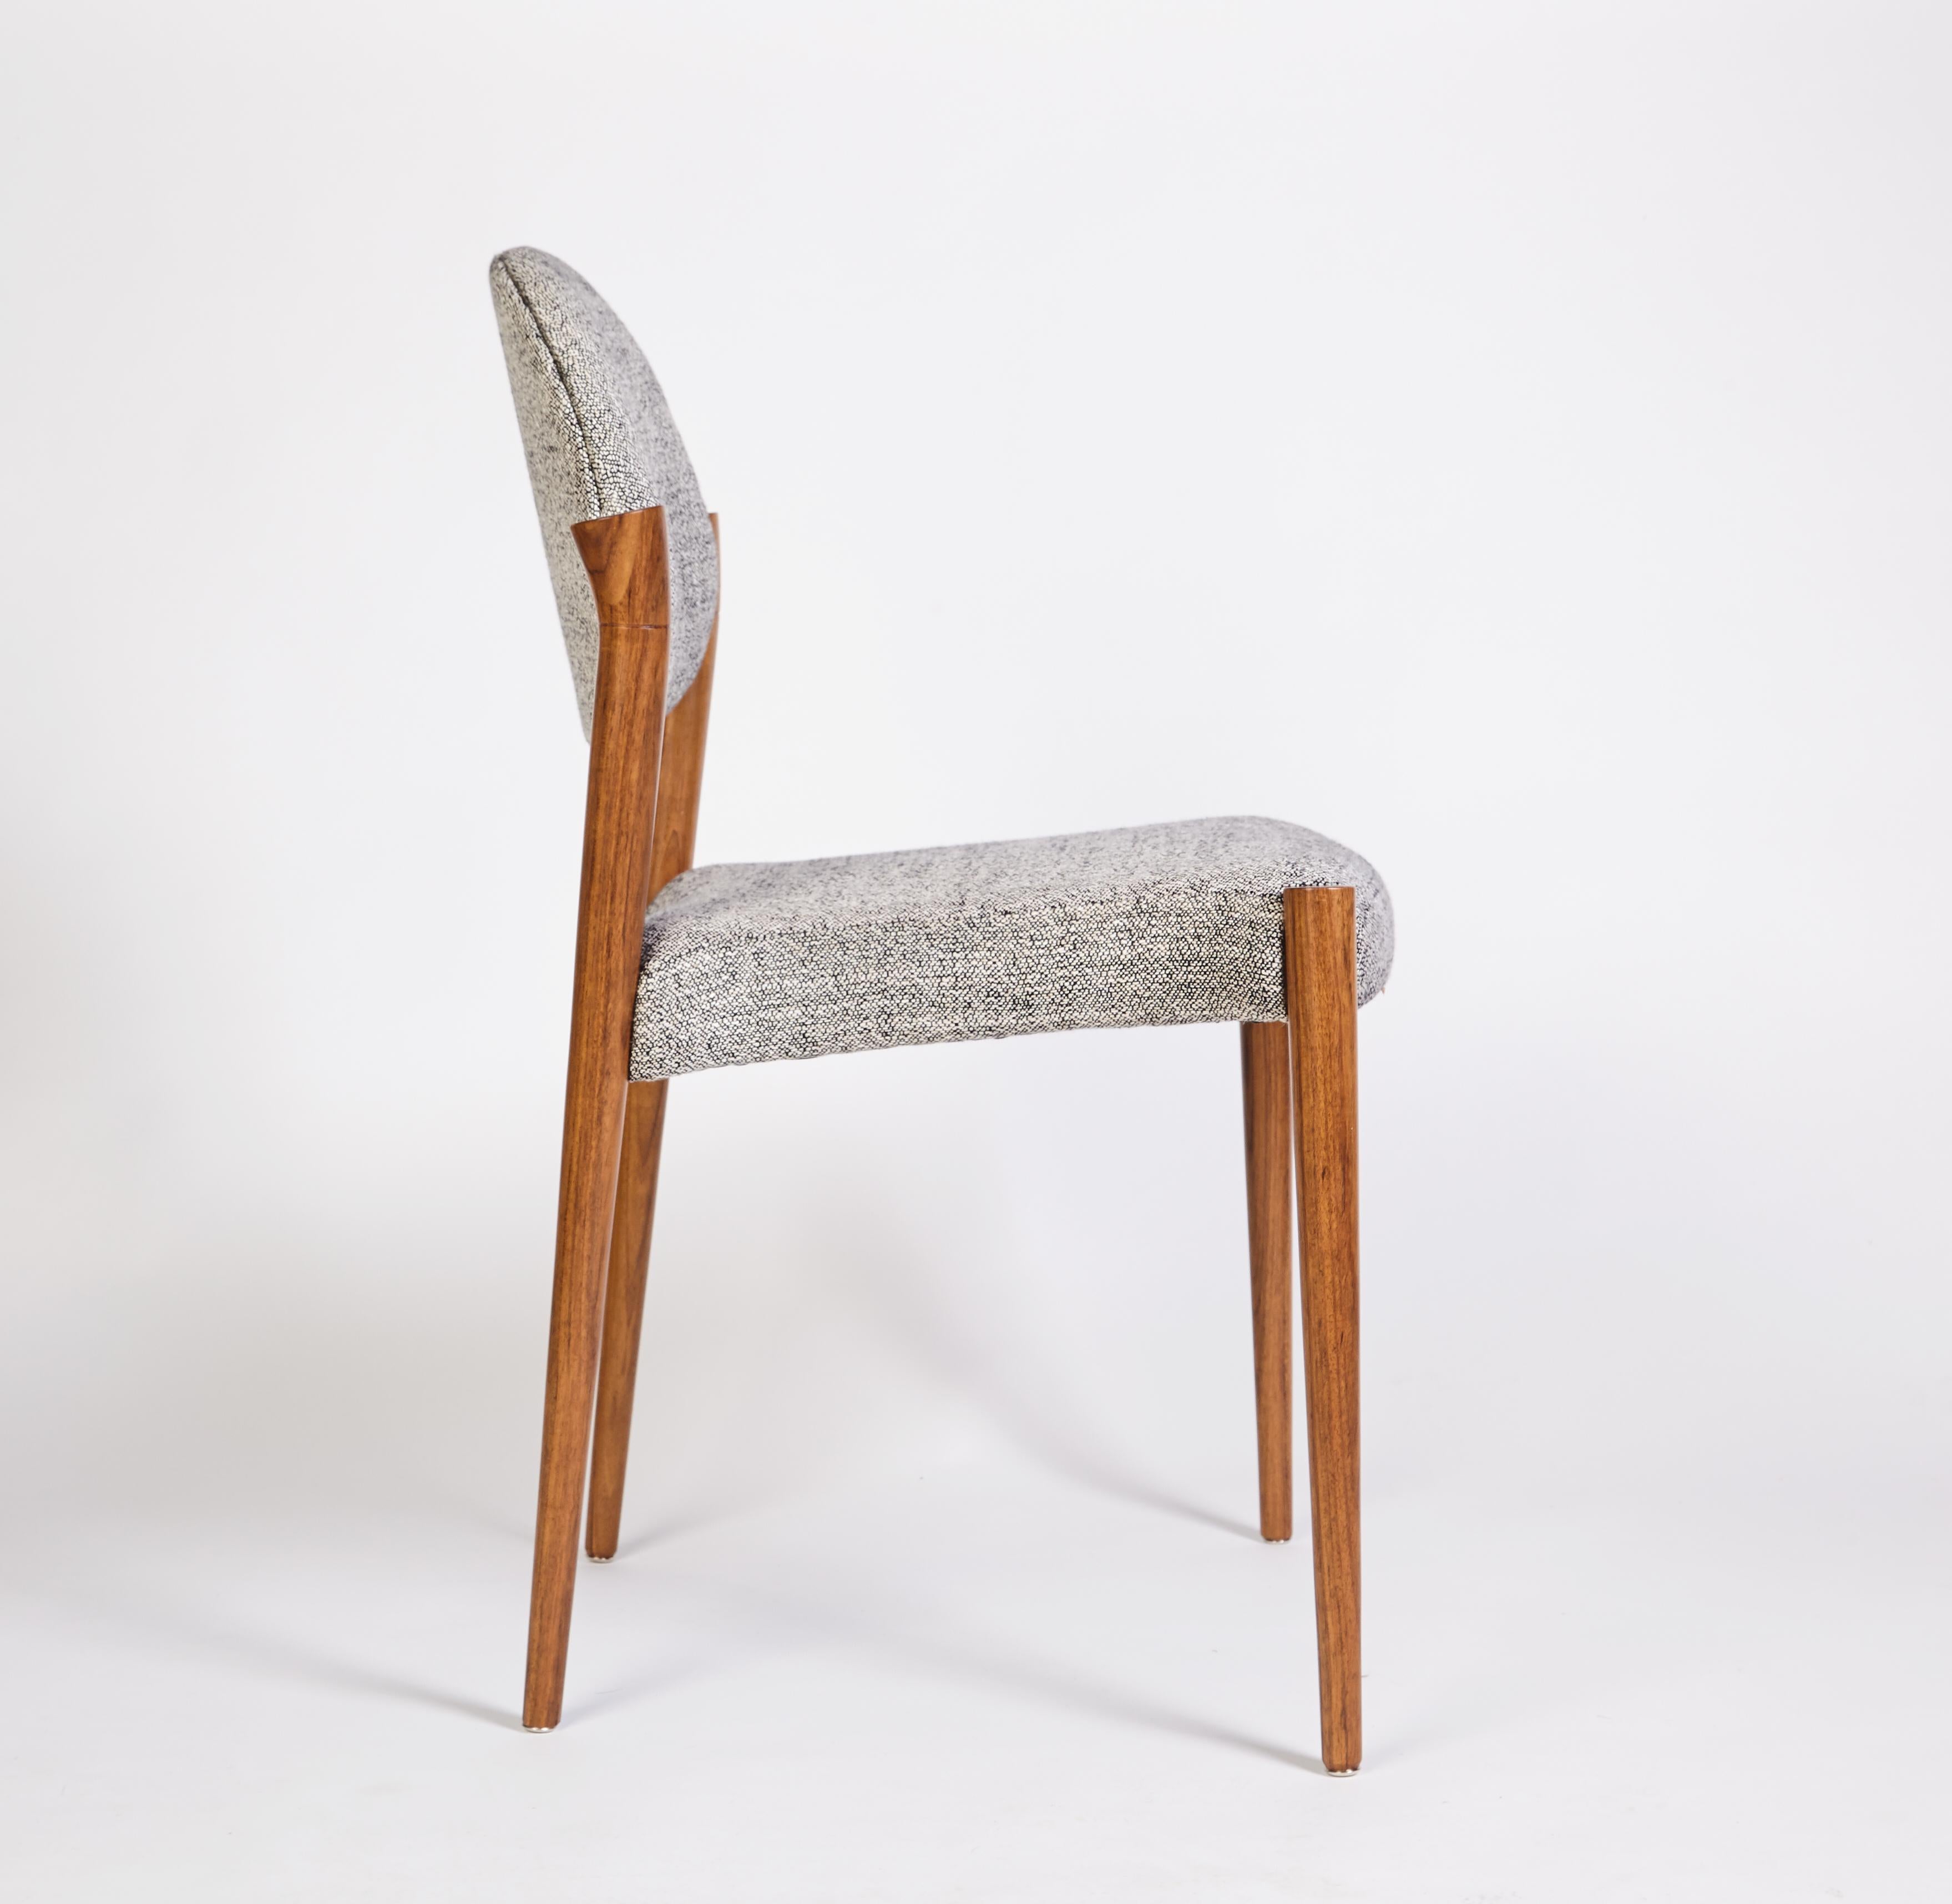 Tanoco Small Chair Set of 6 Chairs, Mutenye Wood, Handcrafted by Duistt

Tanoco chairs are inspired by the midcentury architecture and interior design. With its long arches creating simultaniously a sensation of stability and movement. The name